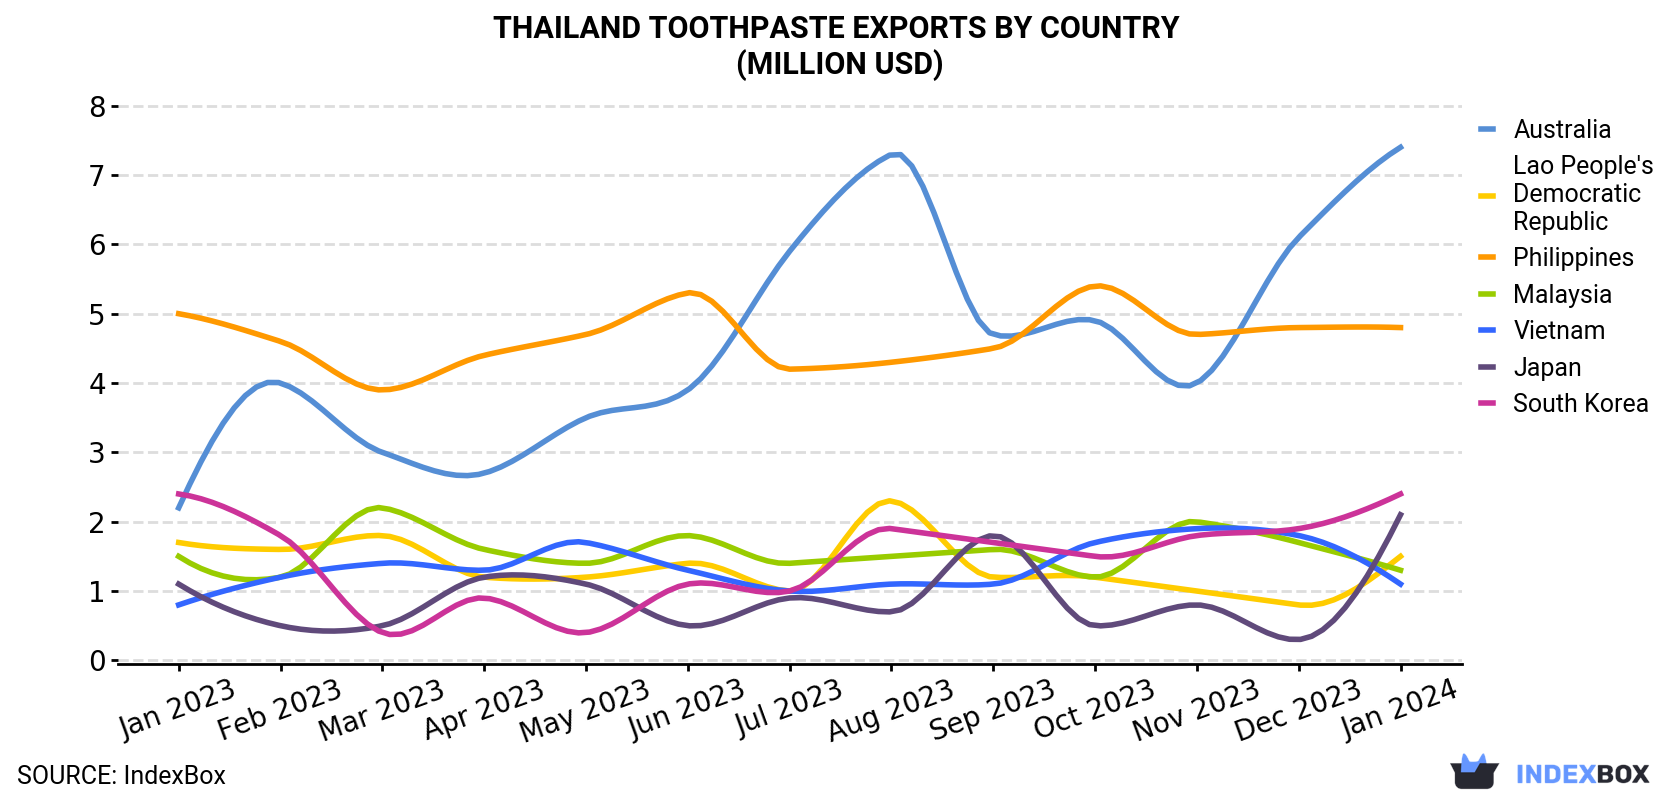 Thailand Toothpaste Exports By Country (Million USD)